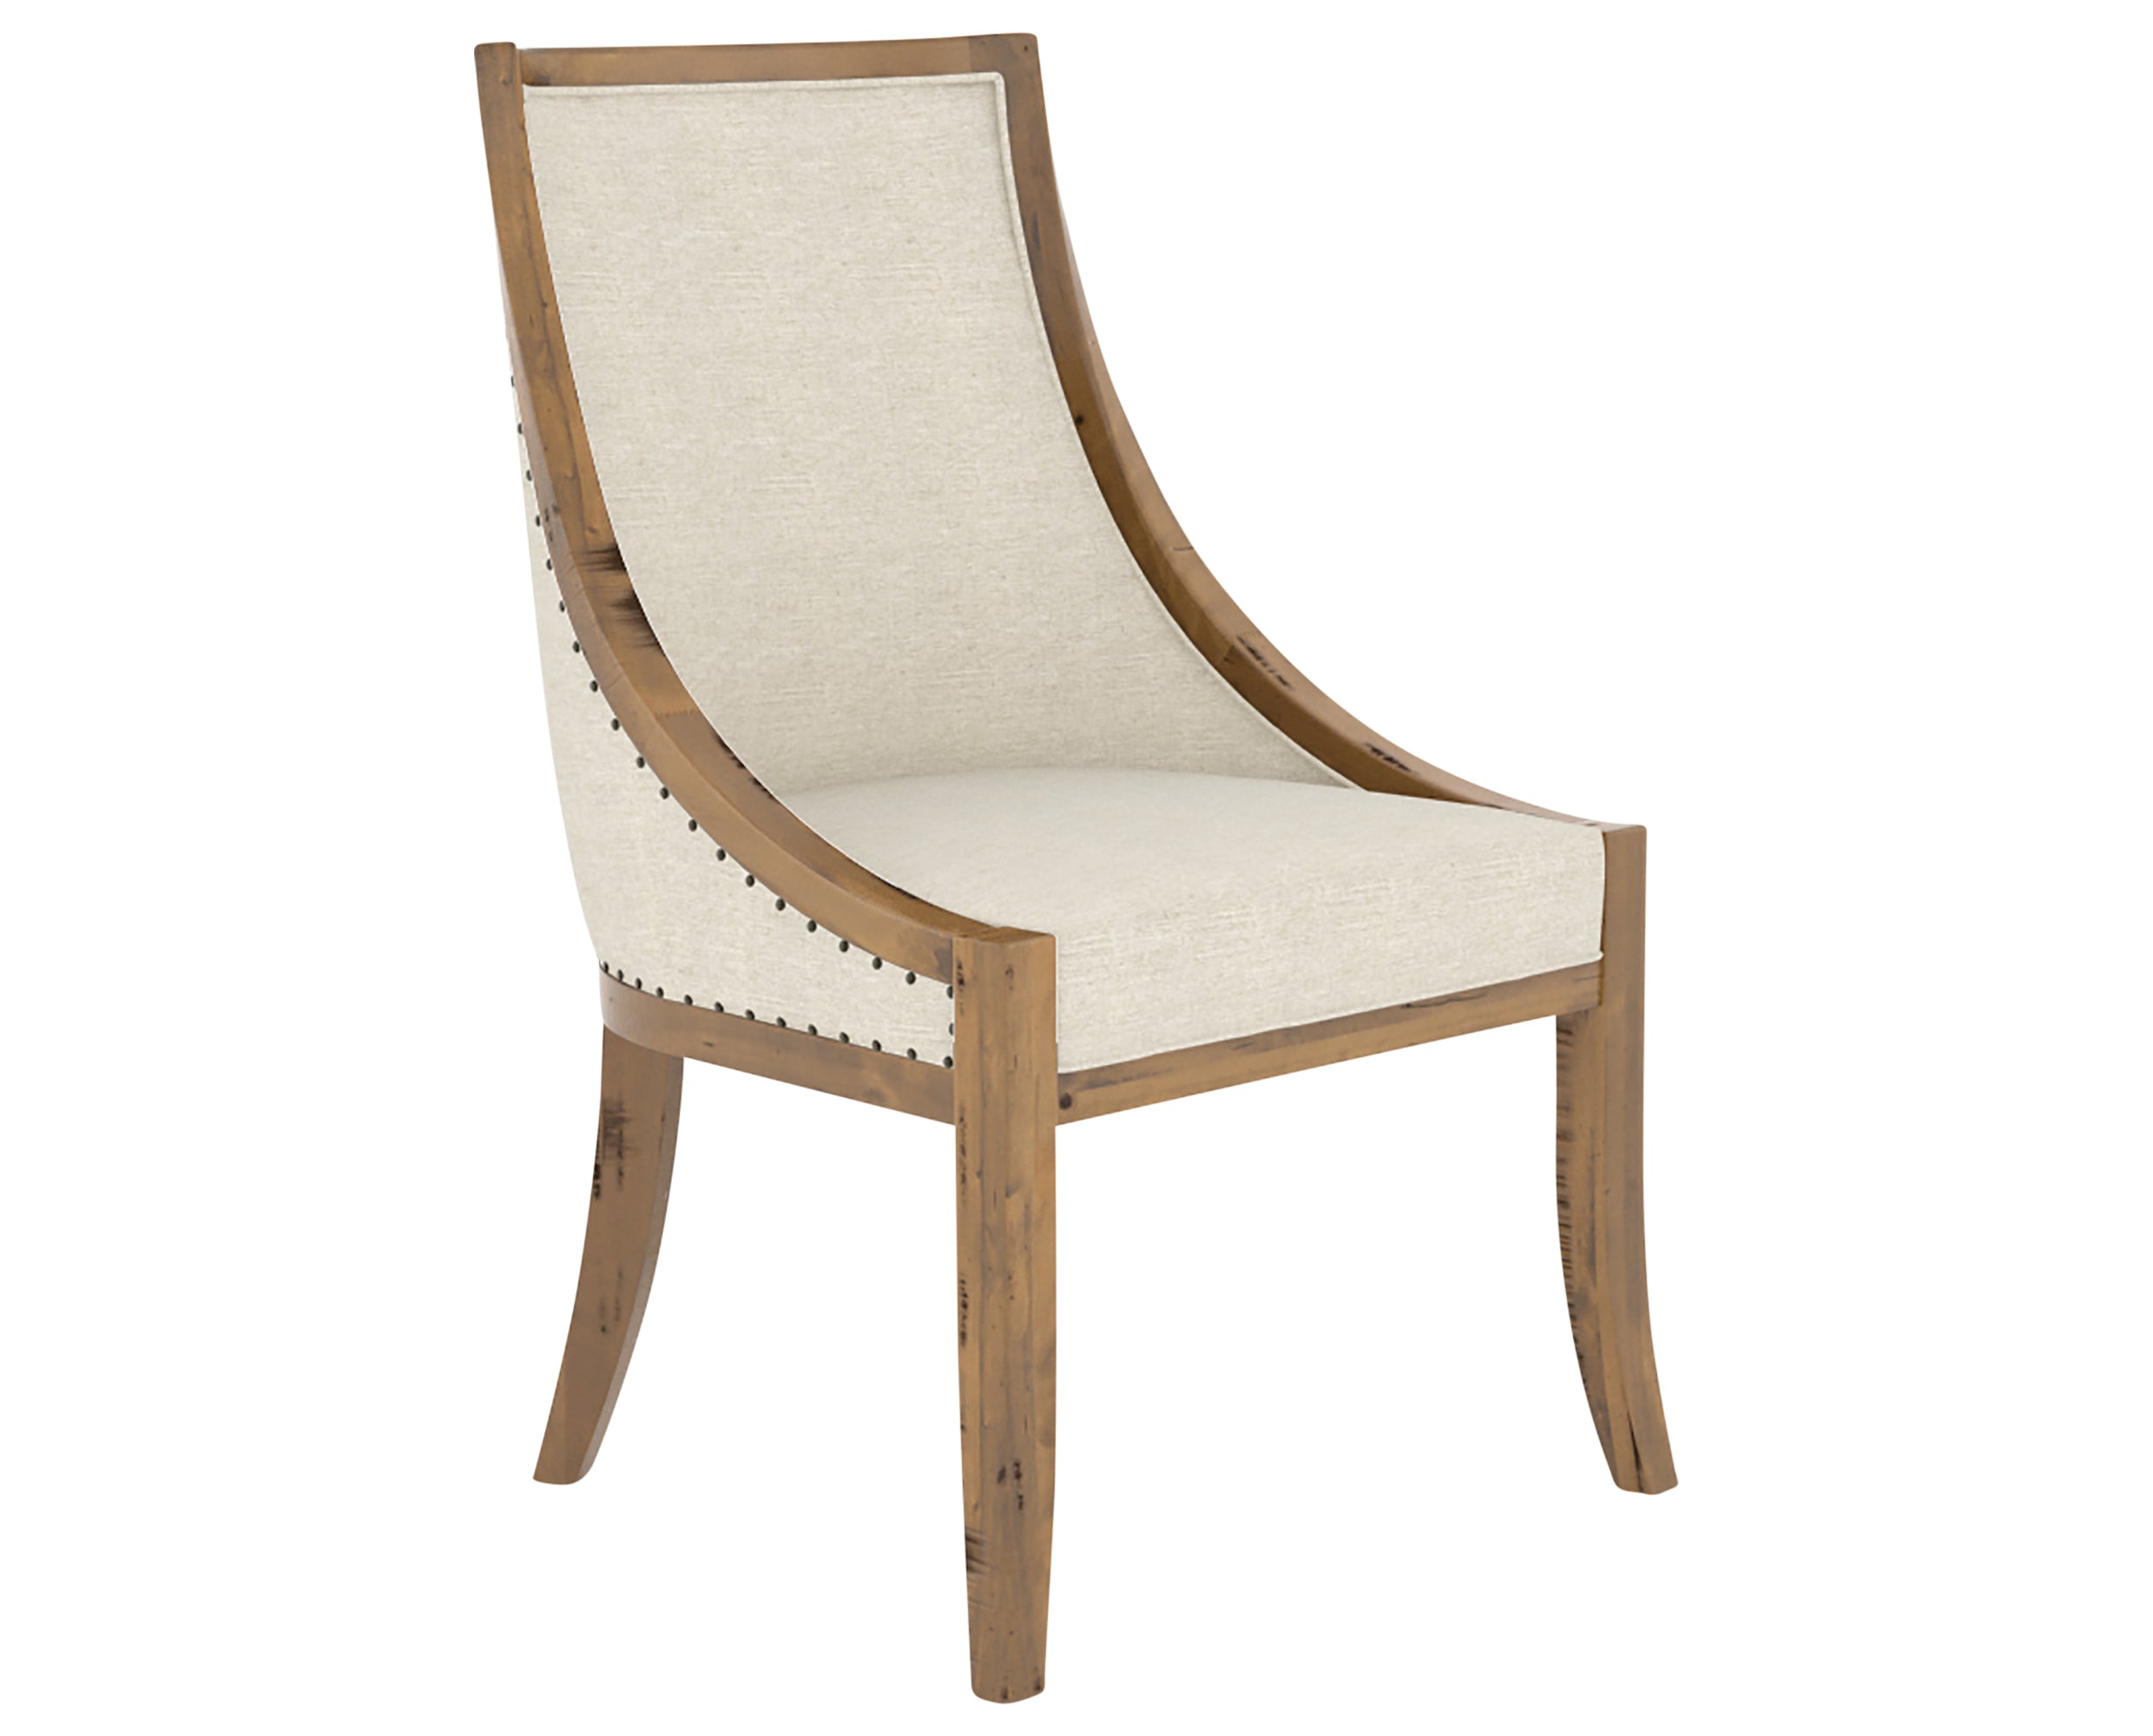 Oak Washed and Fabric TW with Antique Brass Nails | Canadel Champlain Dining Chair 319 | Valley Ridge Furniture